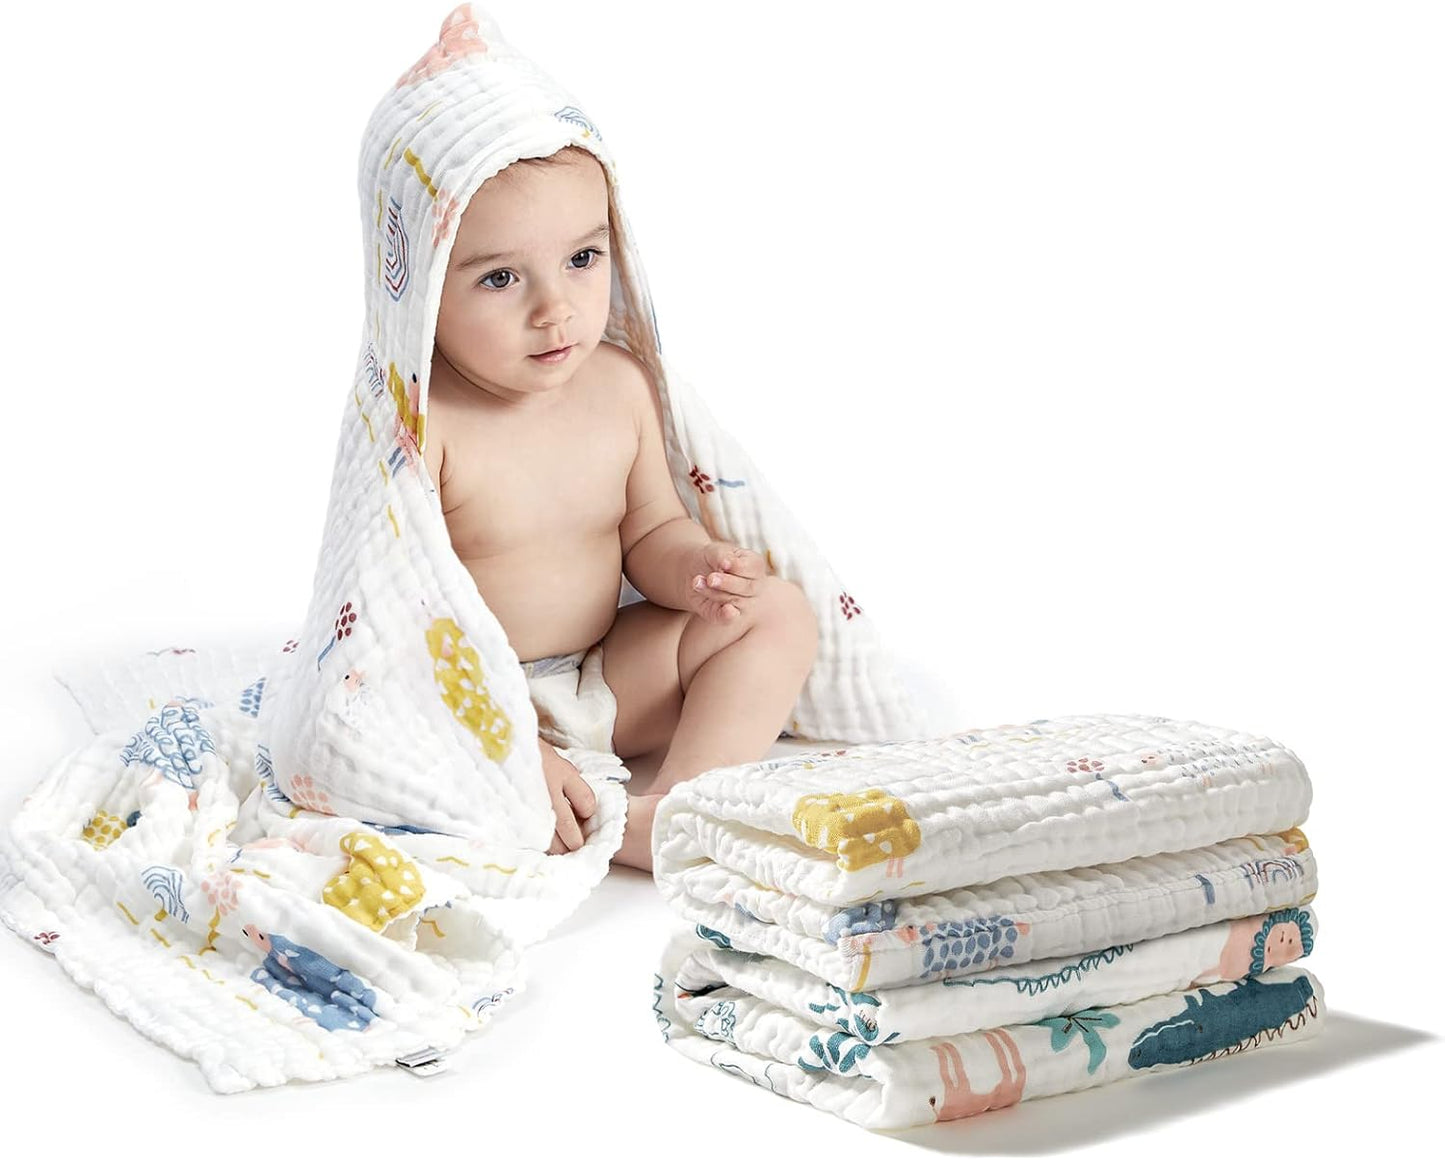 bc babycare 2 Pack Baby Towels, Natural Muslin Cotton Baby Bath Towel, Soft Absorbent Hooded Baby Towels, Unisex Infant Bath Towels for Baby to Toddler Boys Girls, Large Size 37.4 * 37.4 Inch